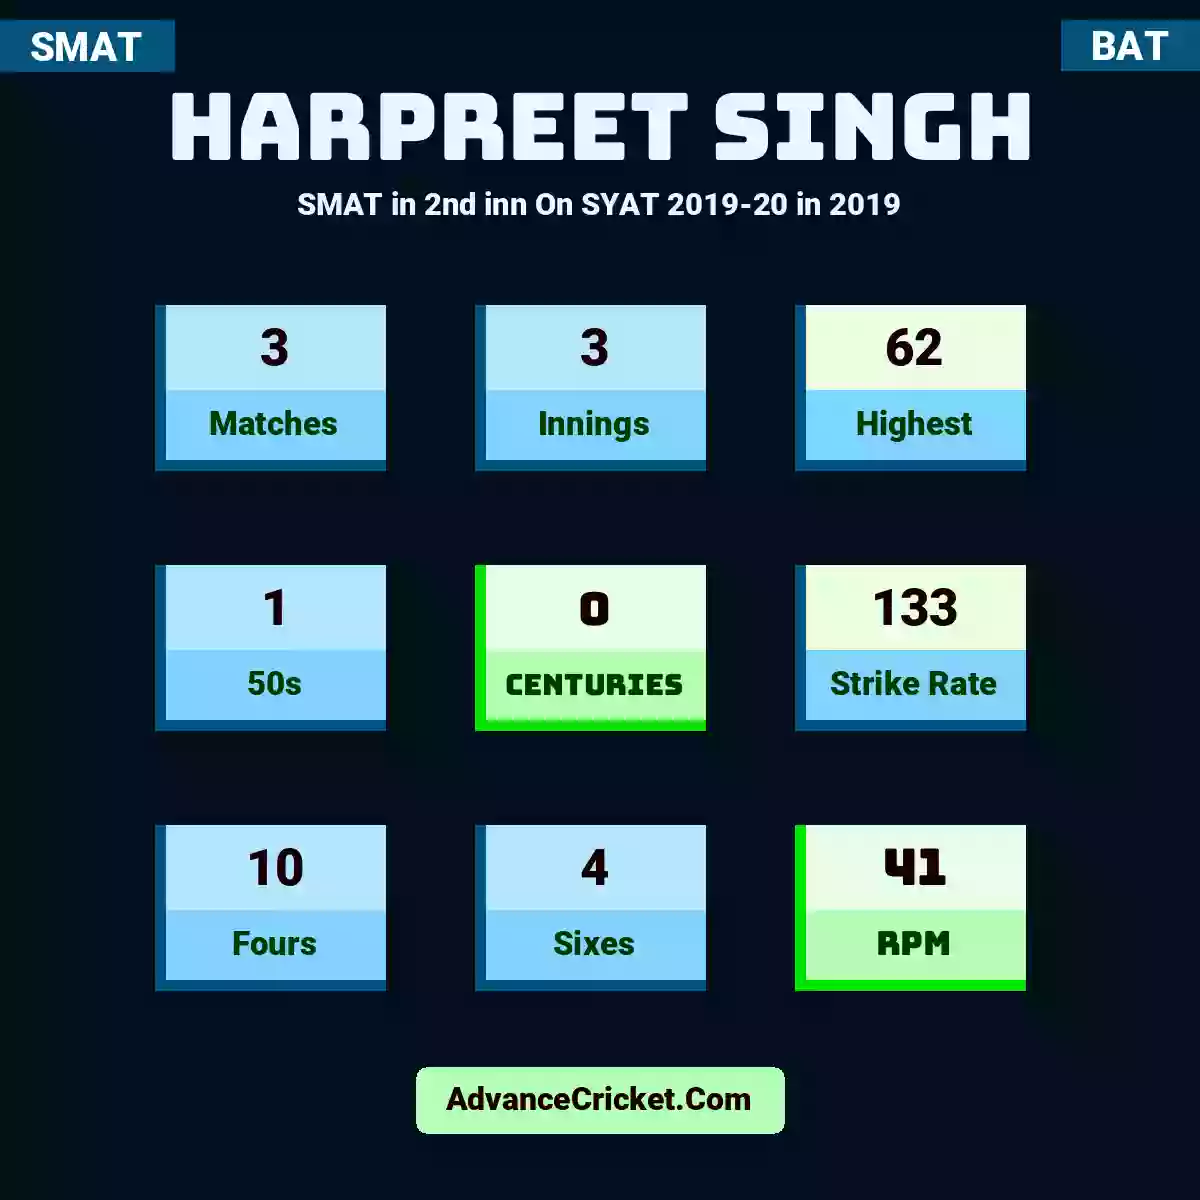 Harpreet Singh SMAT  in 2nd inn On SYAT 2019-20 in 2019, Harpreet Singh played 3 matches, scored 62 runs as highest, 1 half-centuries, and 0 centuries, with a strike rate of 133. H.Singh hit 10 fours and 4 sixes, with an RPM of 41.